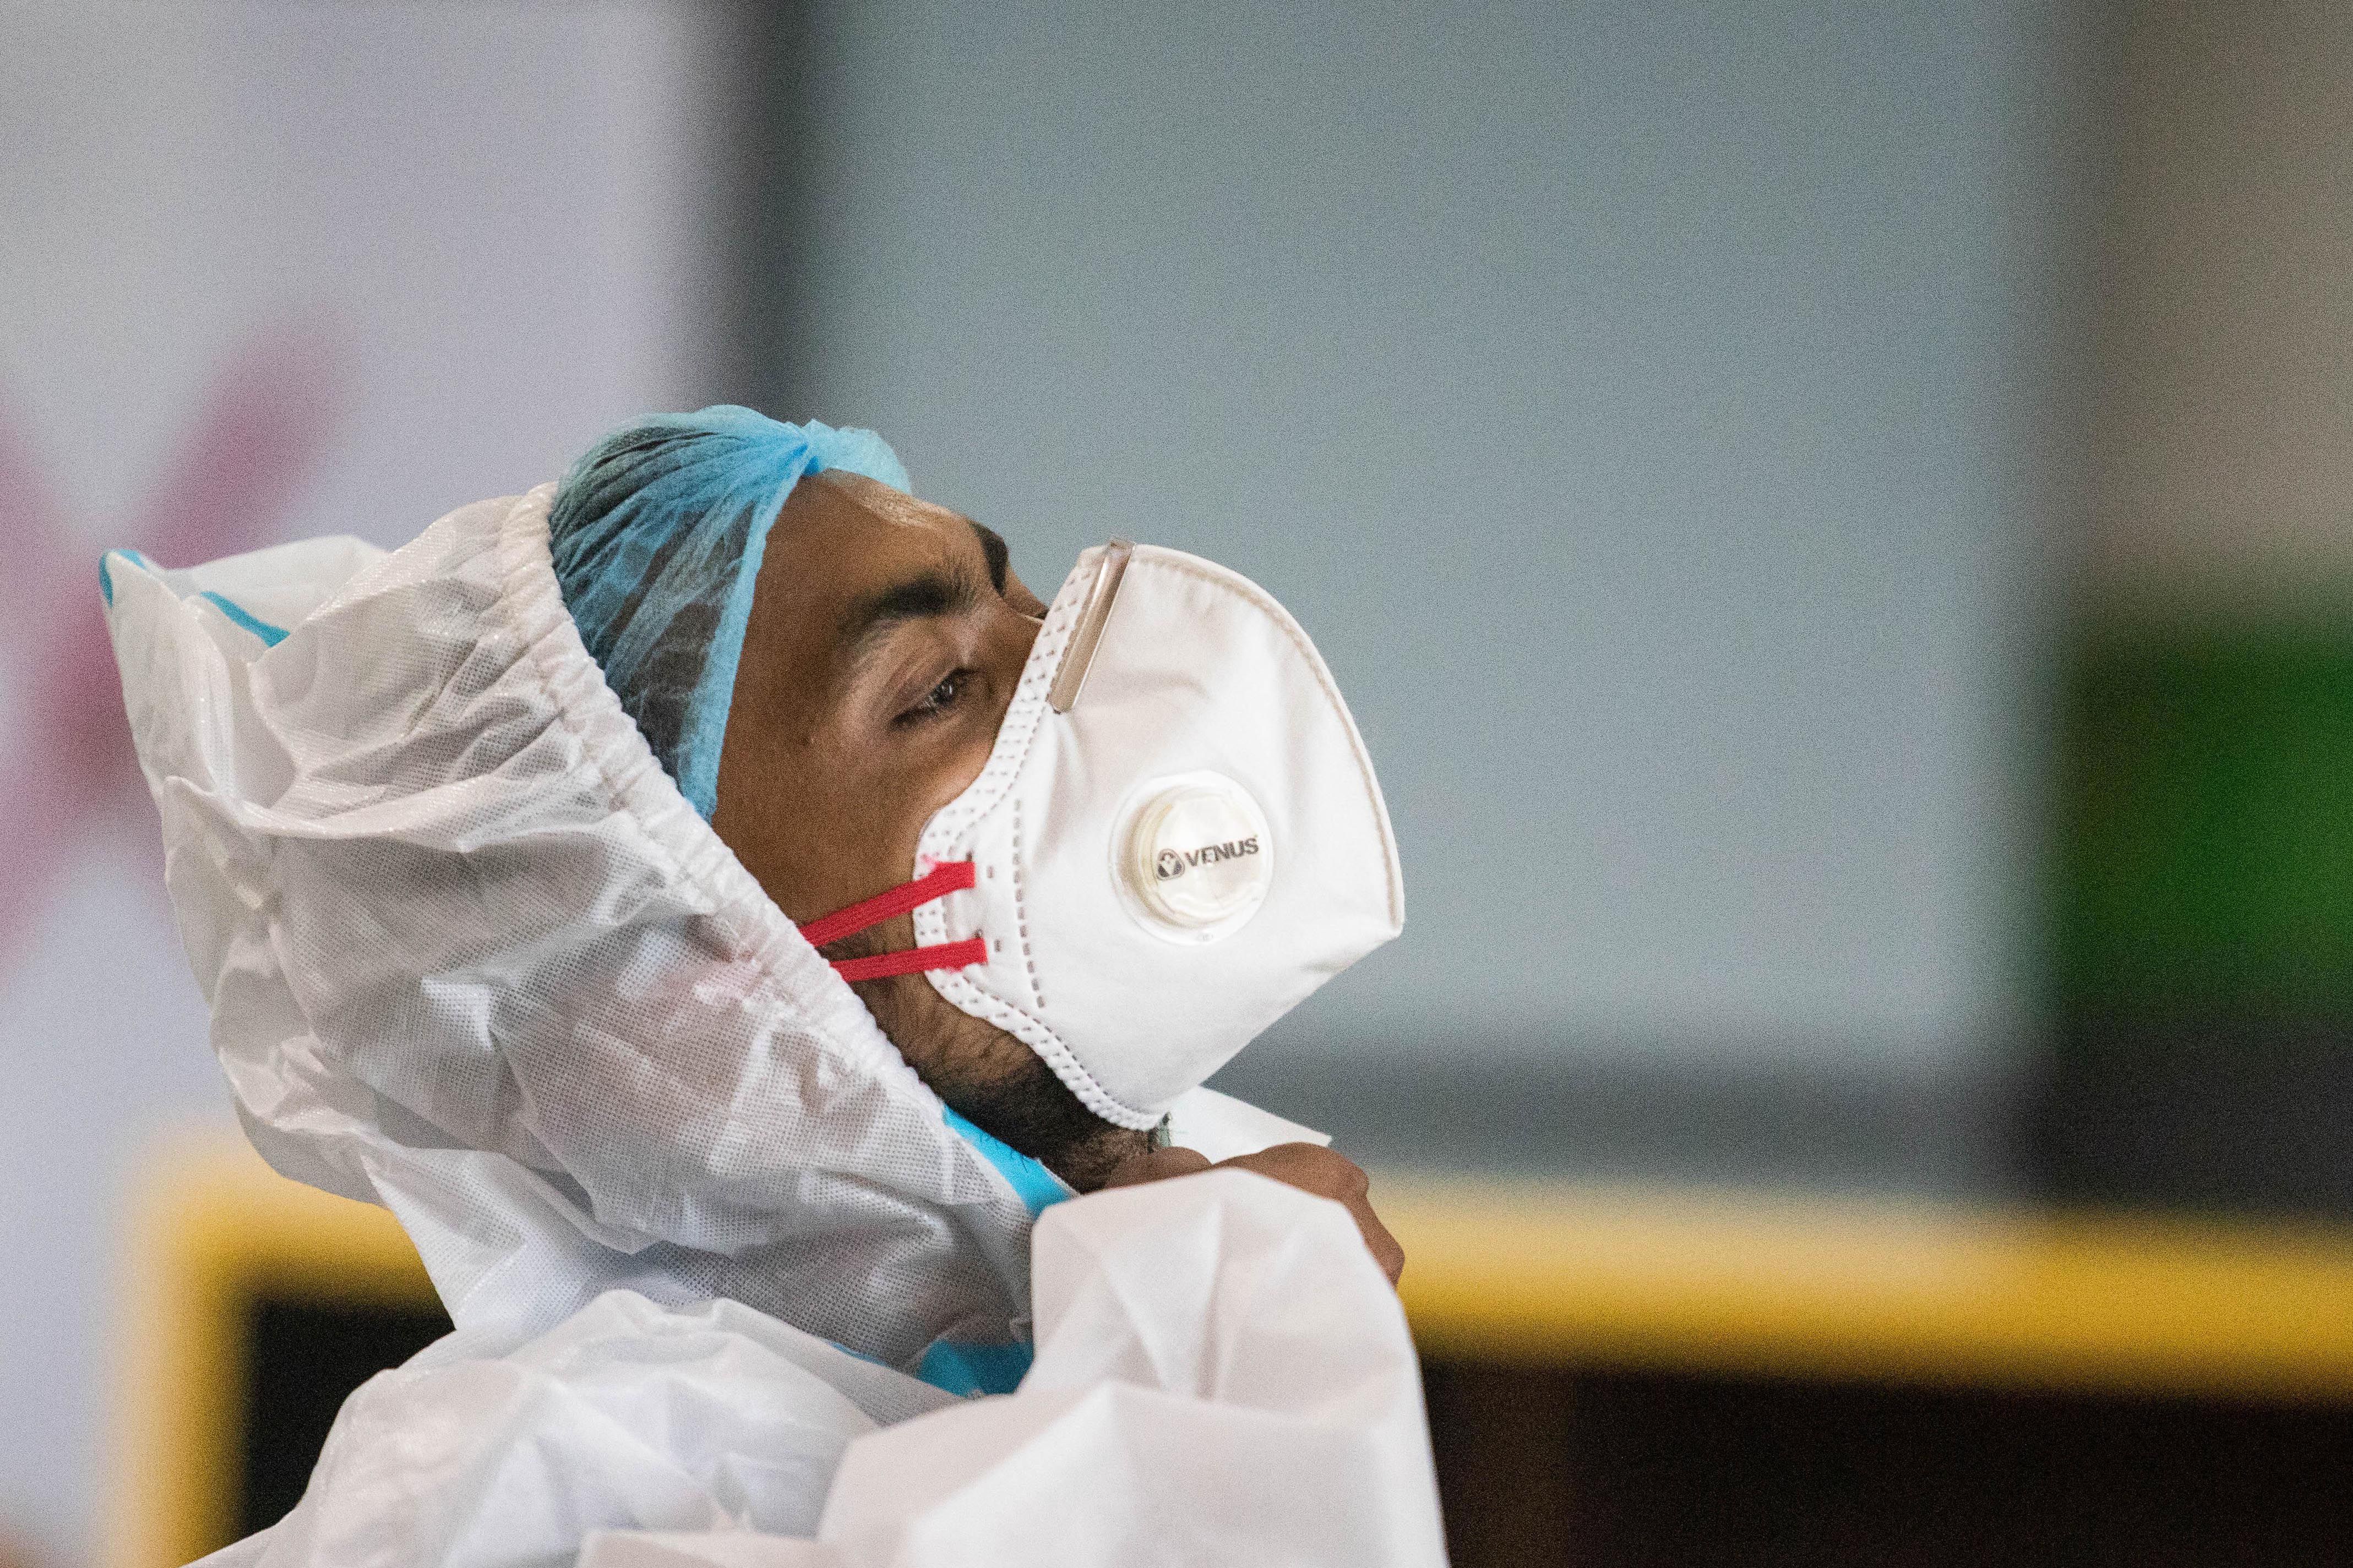 17/07/2020 17 July 2020, India, New Delhi: A health worker wears his PPE suit before entering the isolation wards at the Commonwealth Games (CWG) Village sports complex which was temporarily converted into a coronavirus care centre. Photo: Vijay Pandey/ZUMA Wire/dpa POLITICA INTERNACIONAL Vijay Pandey/ZUMA Wire/dpa 